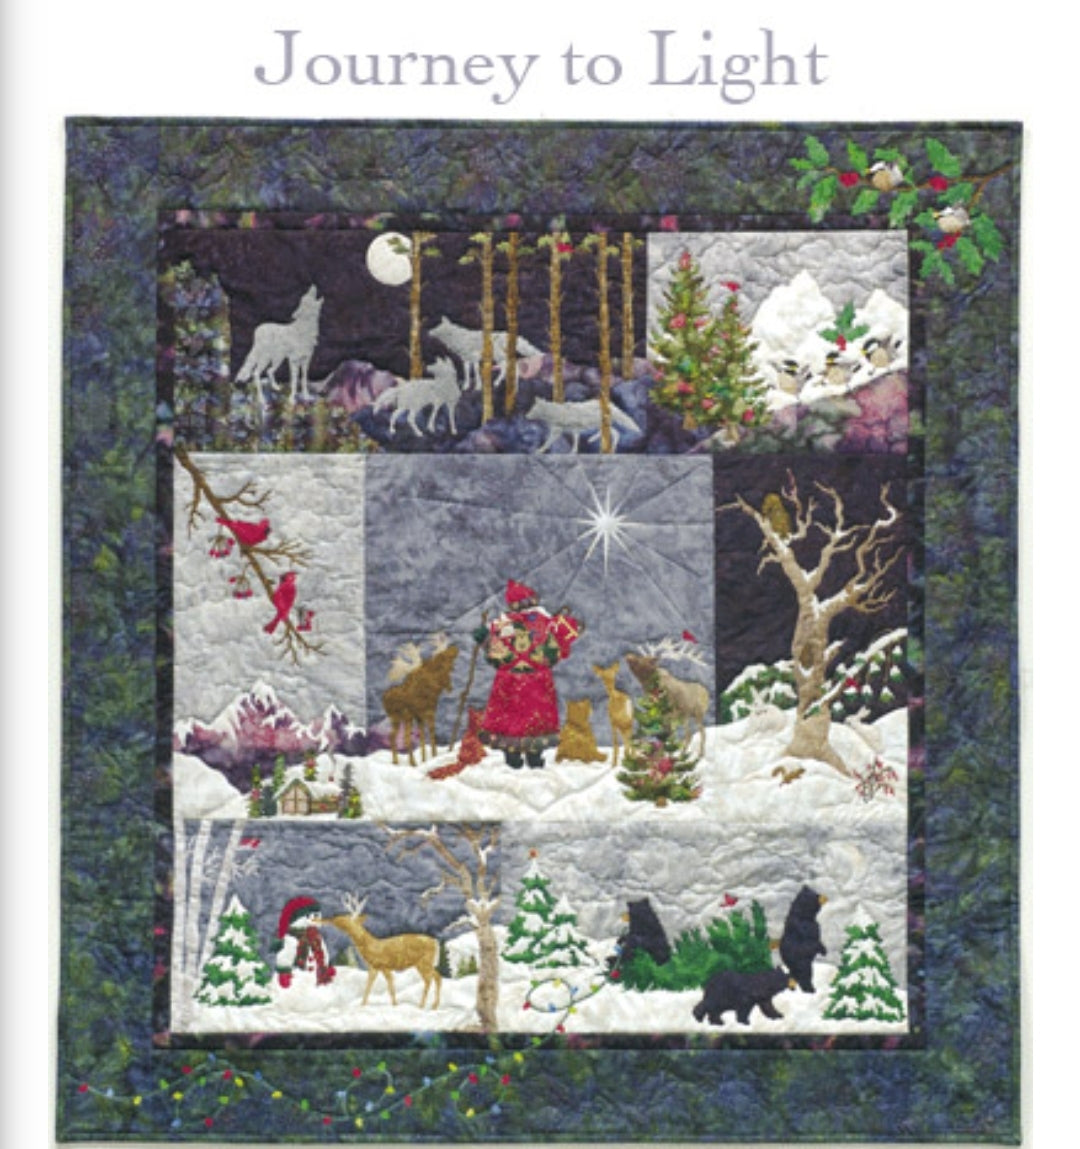 "Journey to Light" Full Quilt (49.5 x 53) All 8 Patterns!